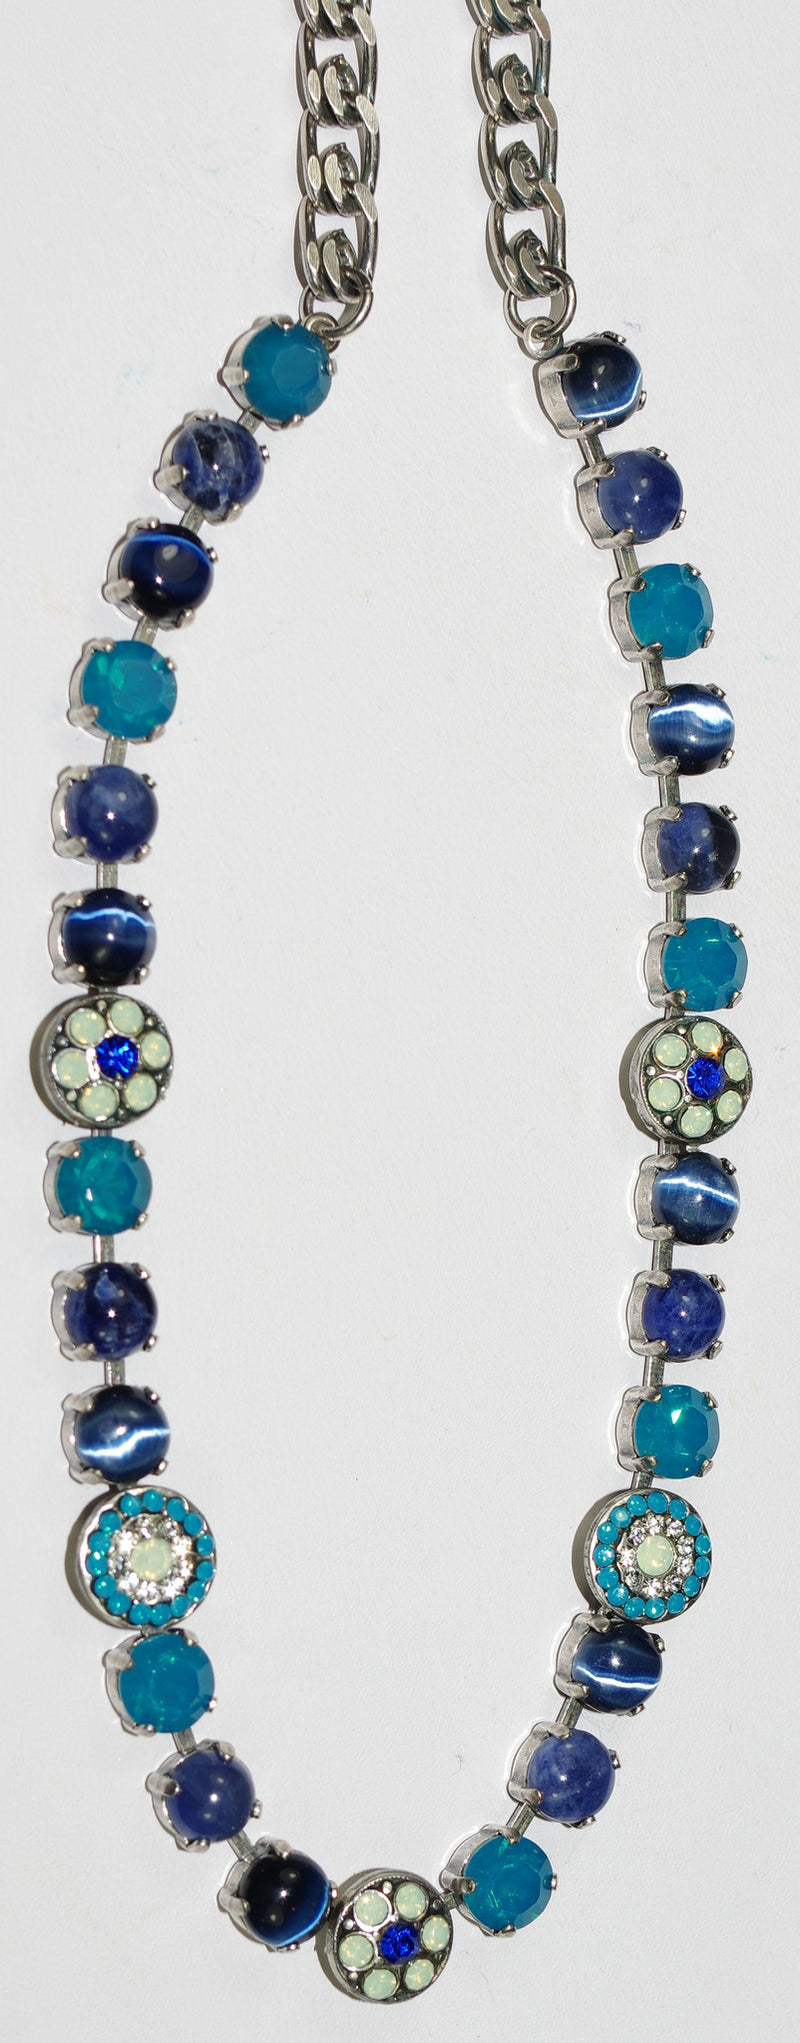 MARIANA NECKLACE ZHANG: pacific opal, blue, navy, clear stones in silver setting, 17" adjustable chain